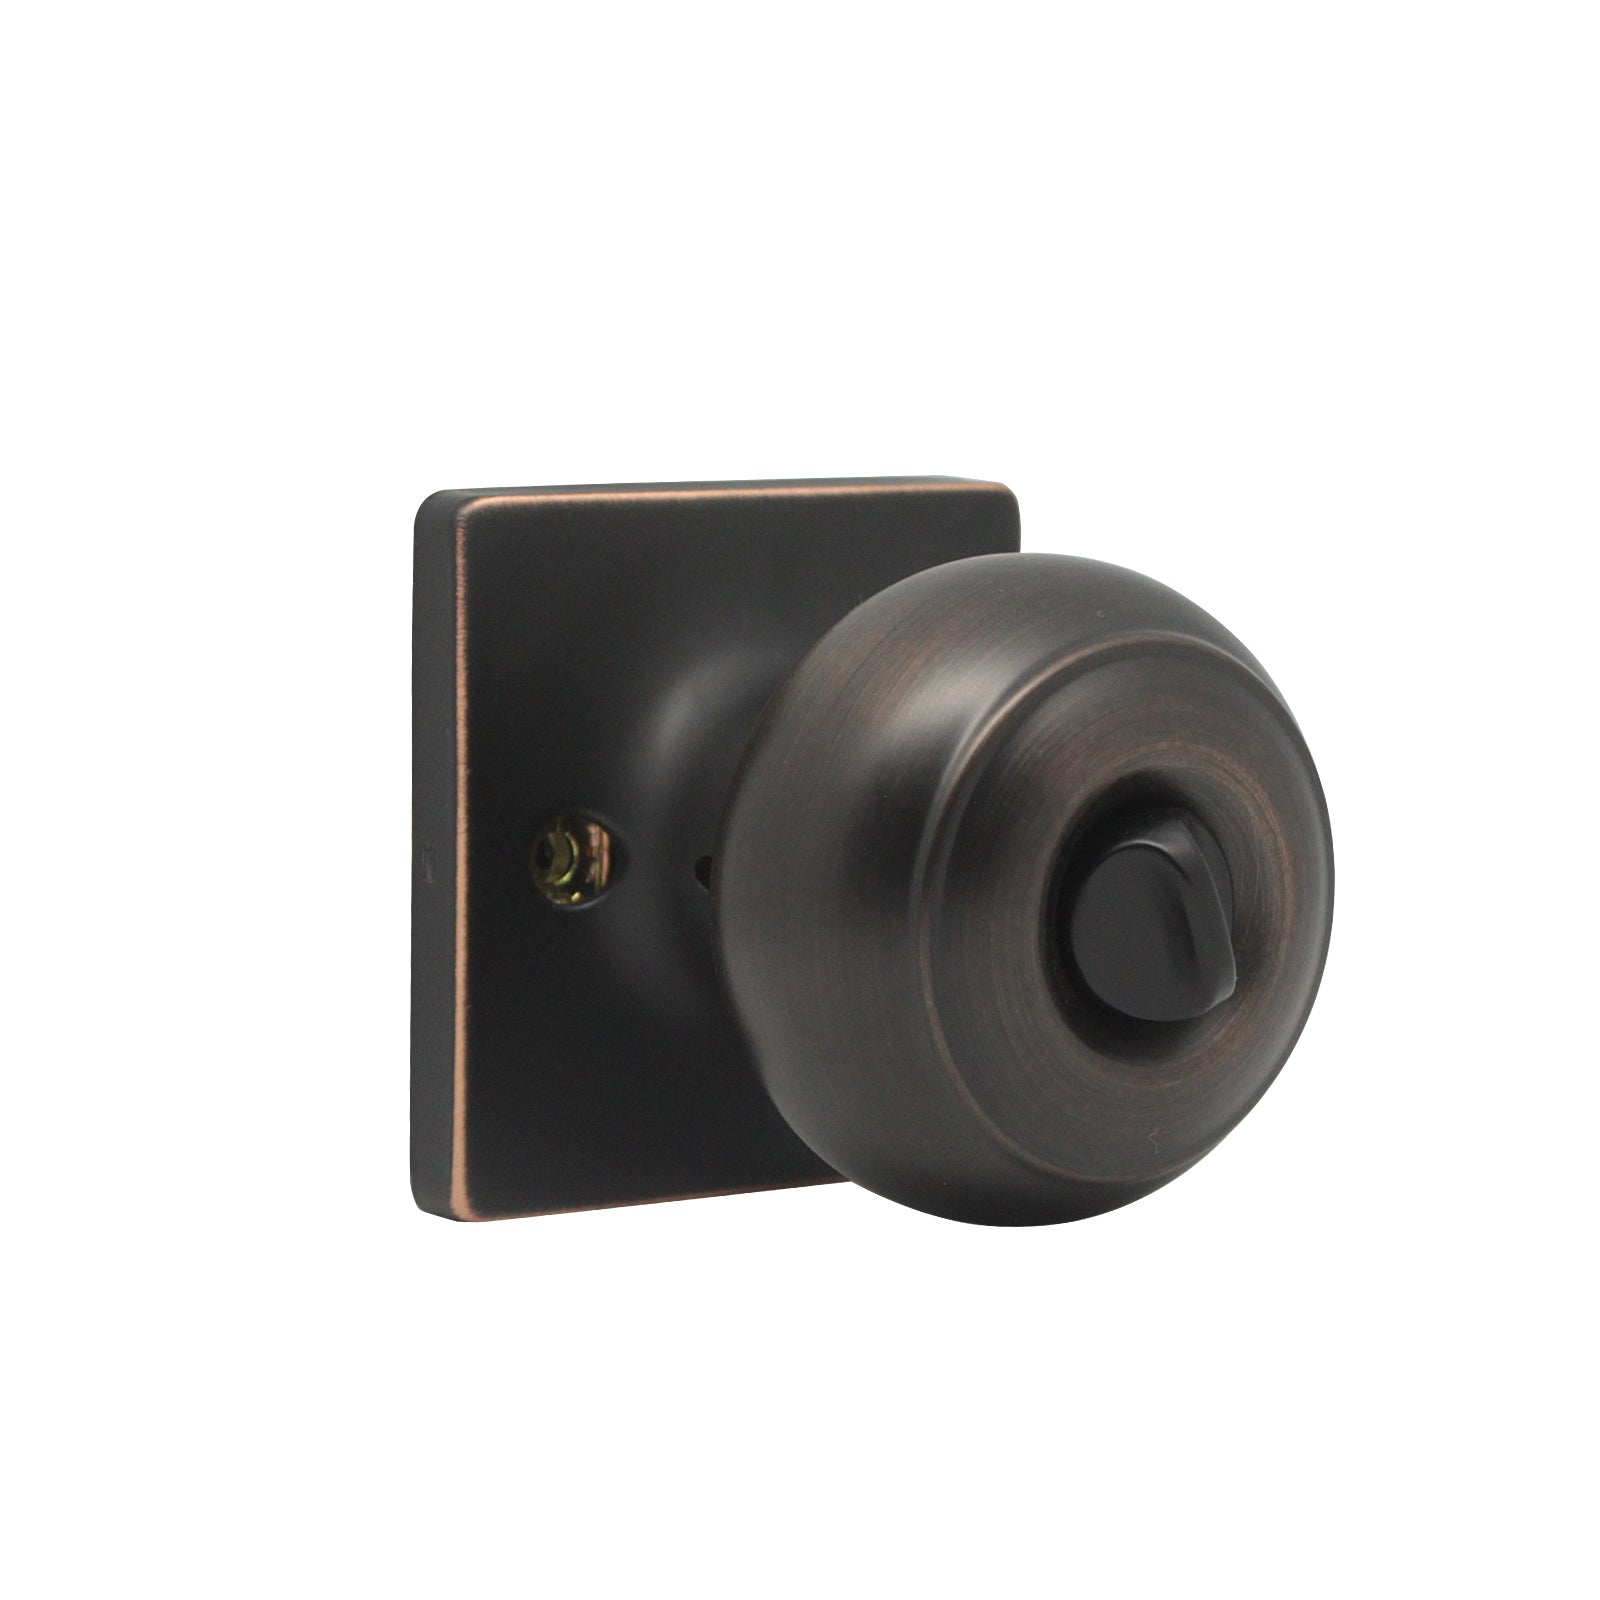 Flat Ball Knob with Square Rosette, Privacy Door Knobs Oil Rubbed Bronze Finish DLS09ORBBK